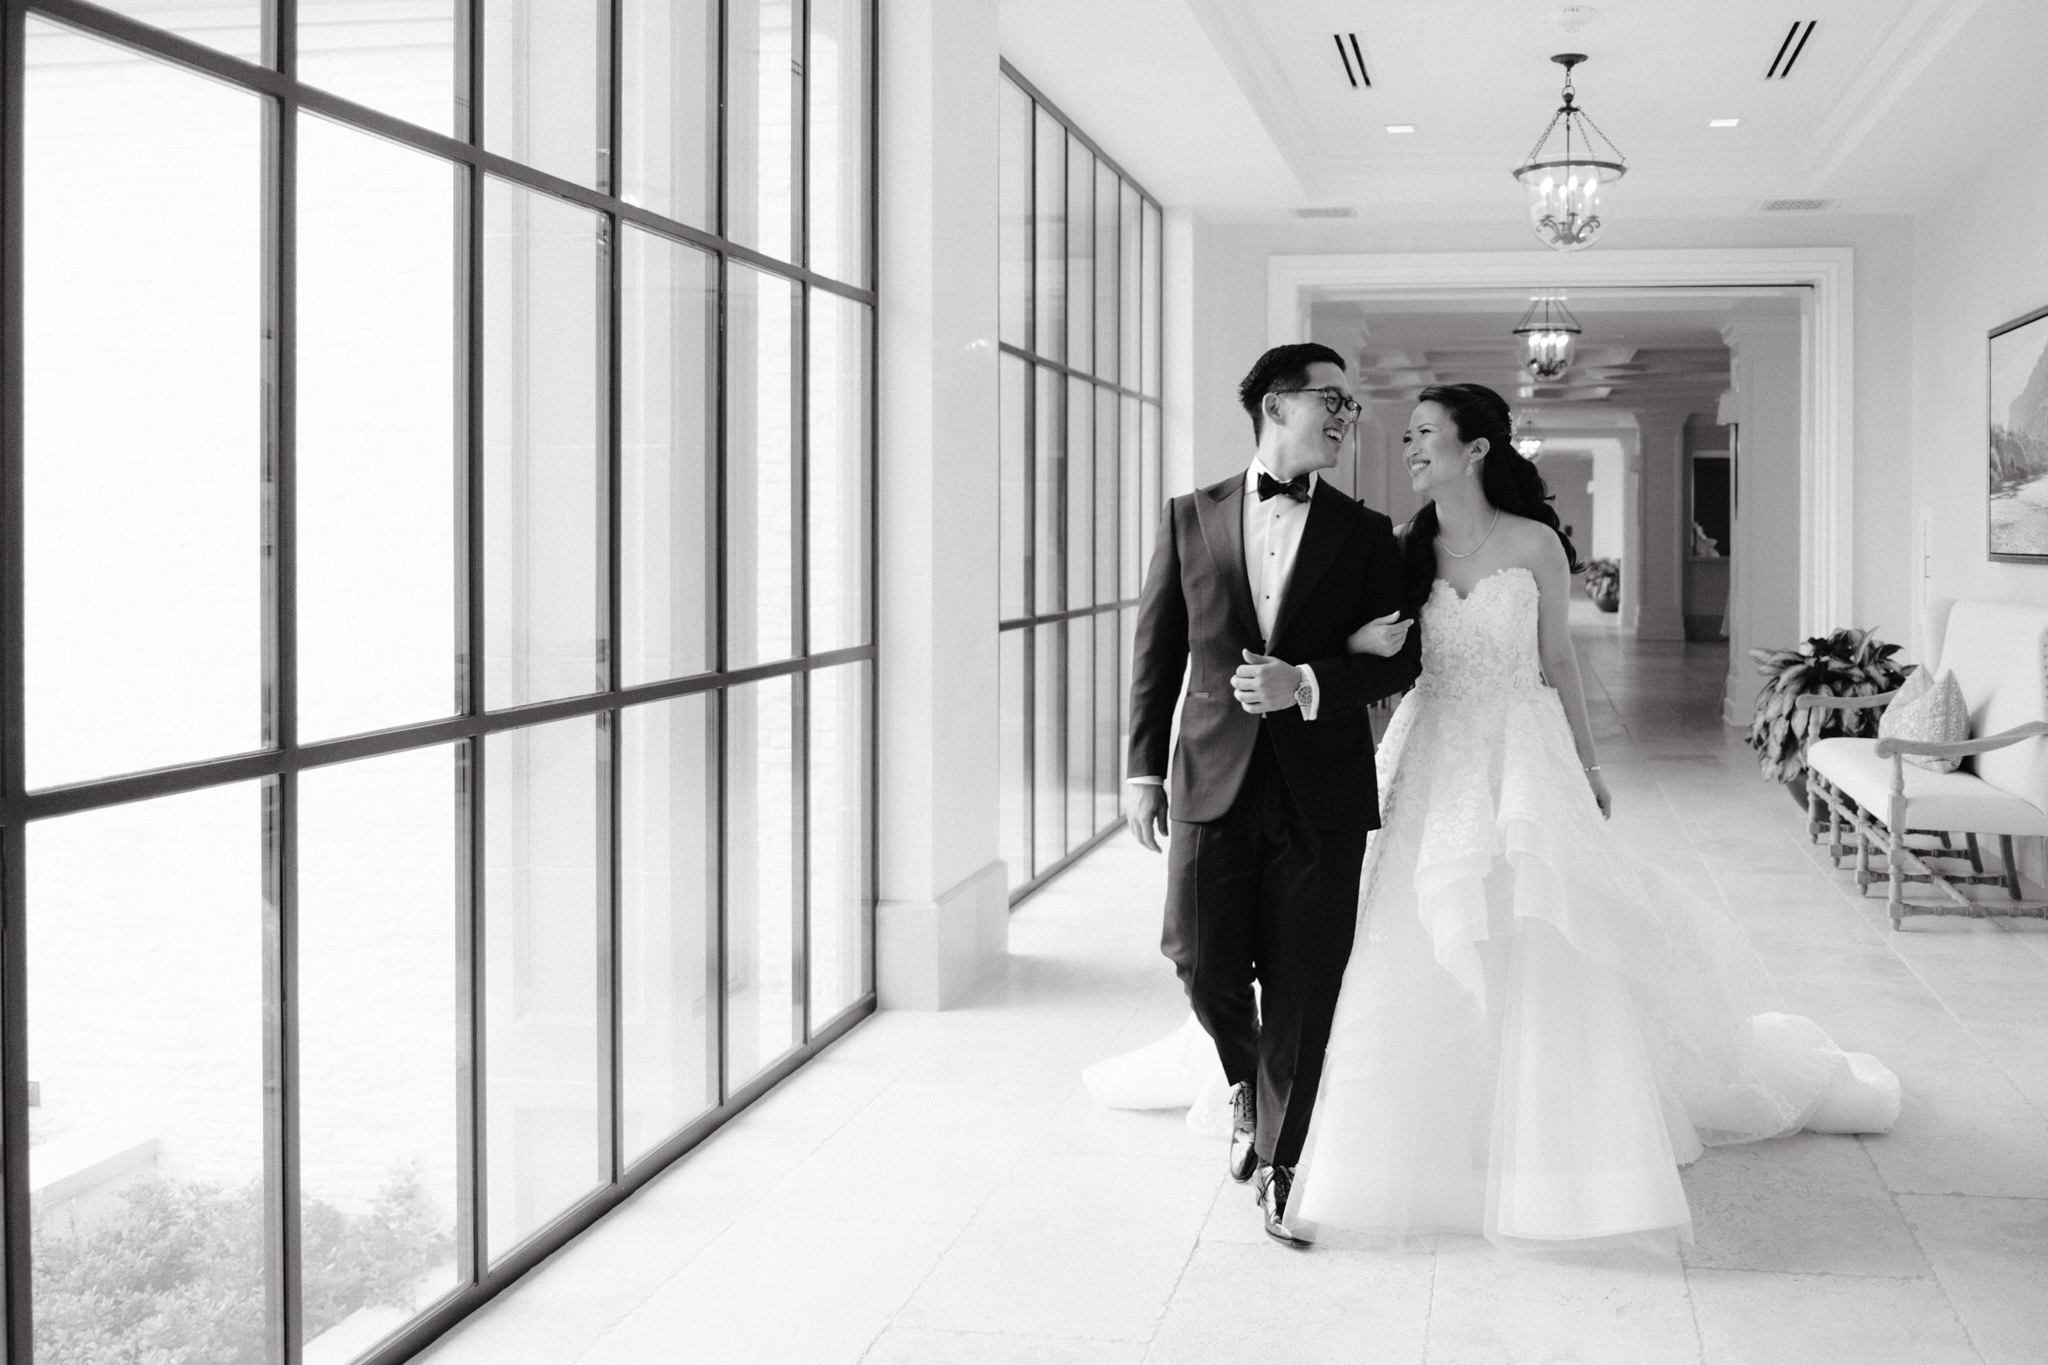 The bride and groom are happily walking in the hallway. Wedding venue image by Jenny Fu Studio